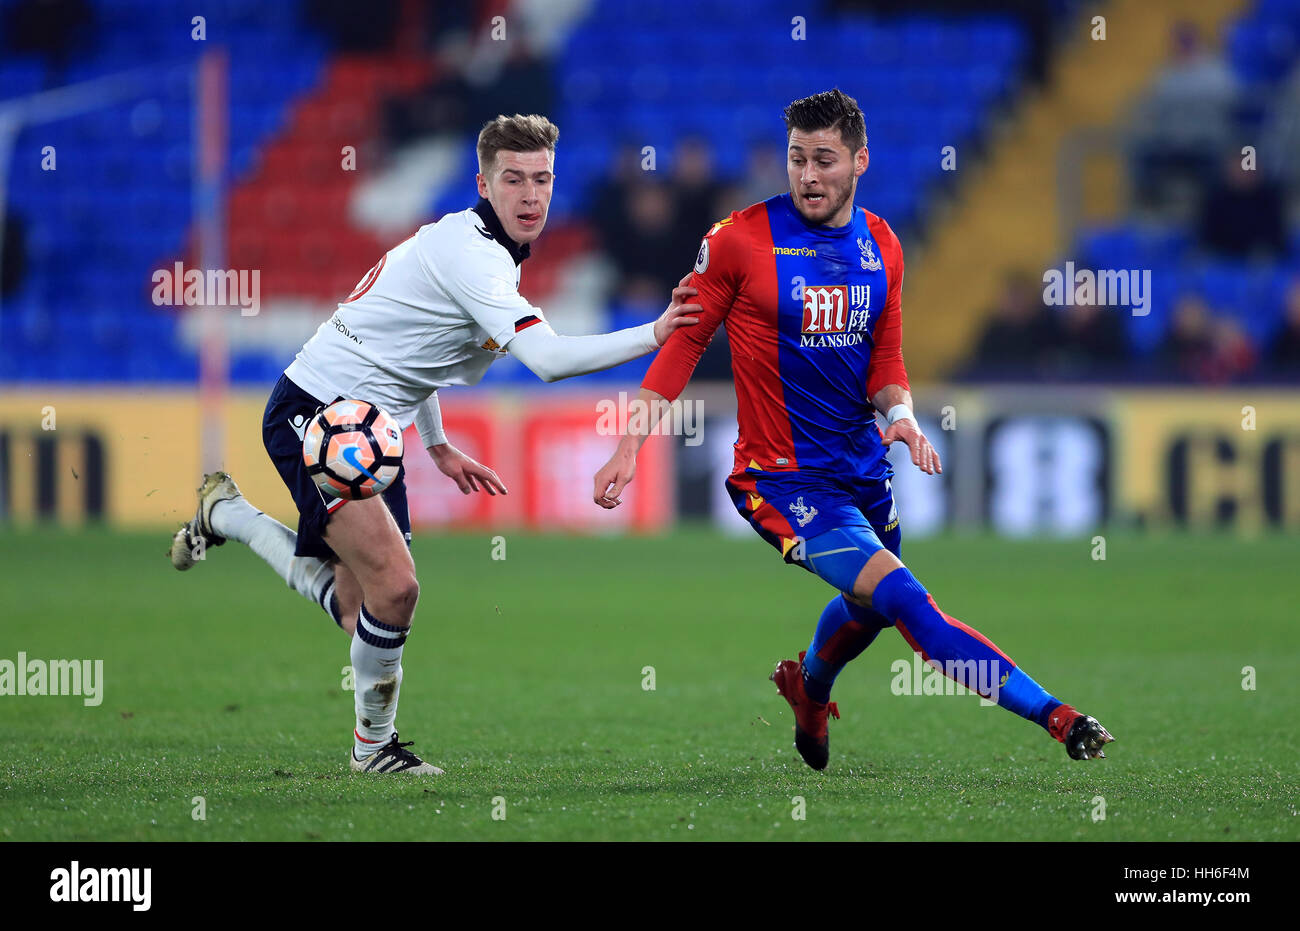 Crystal Palace's Joel Ward (right) and Bolton Wanderers' Josh Vela battle for the ball during the Emirates FA Cup, third round replay match at Selhurst Park, London. Stock Photo